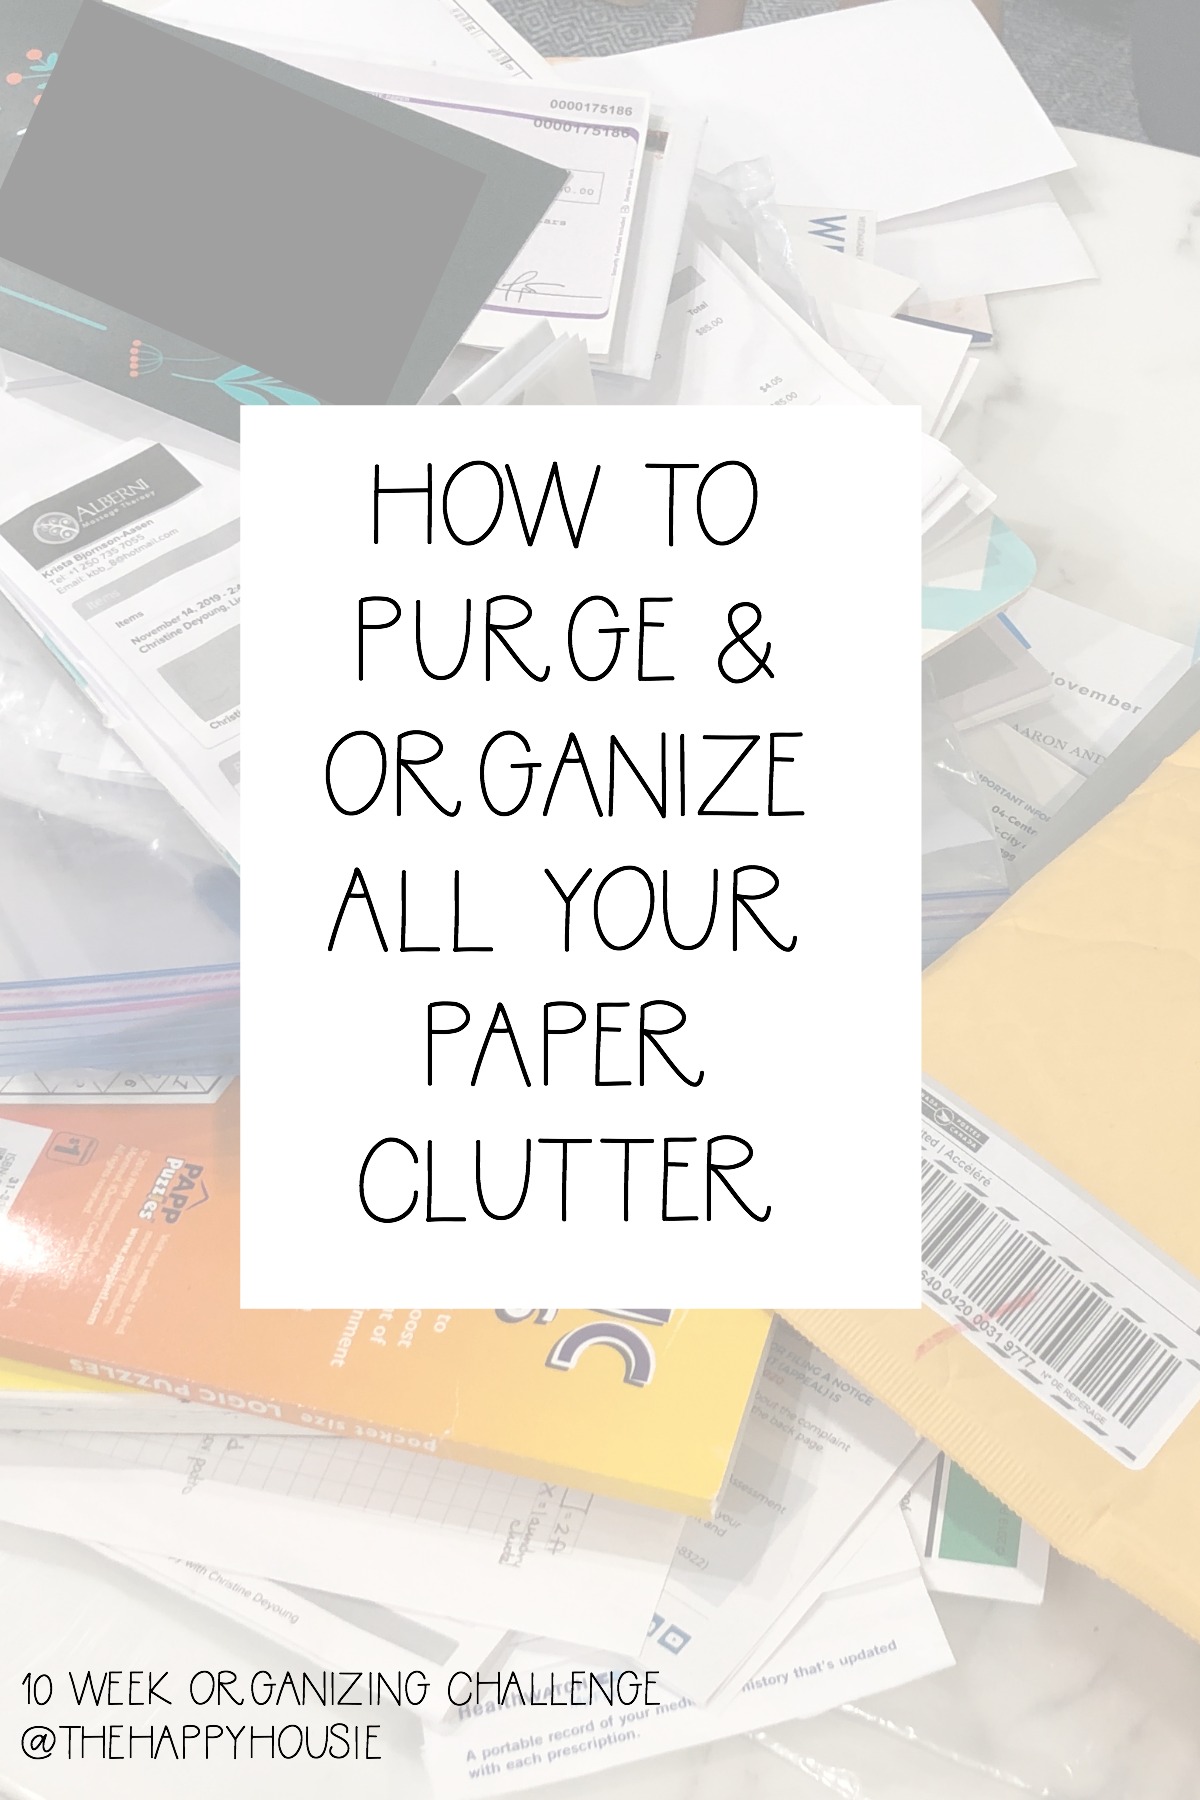 How To Purge & Organize All YOur Paper Clutter poster.